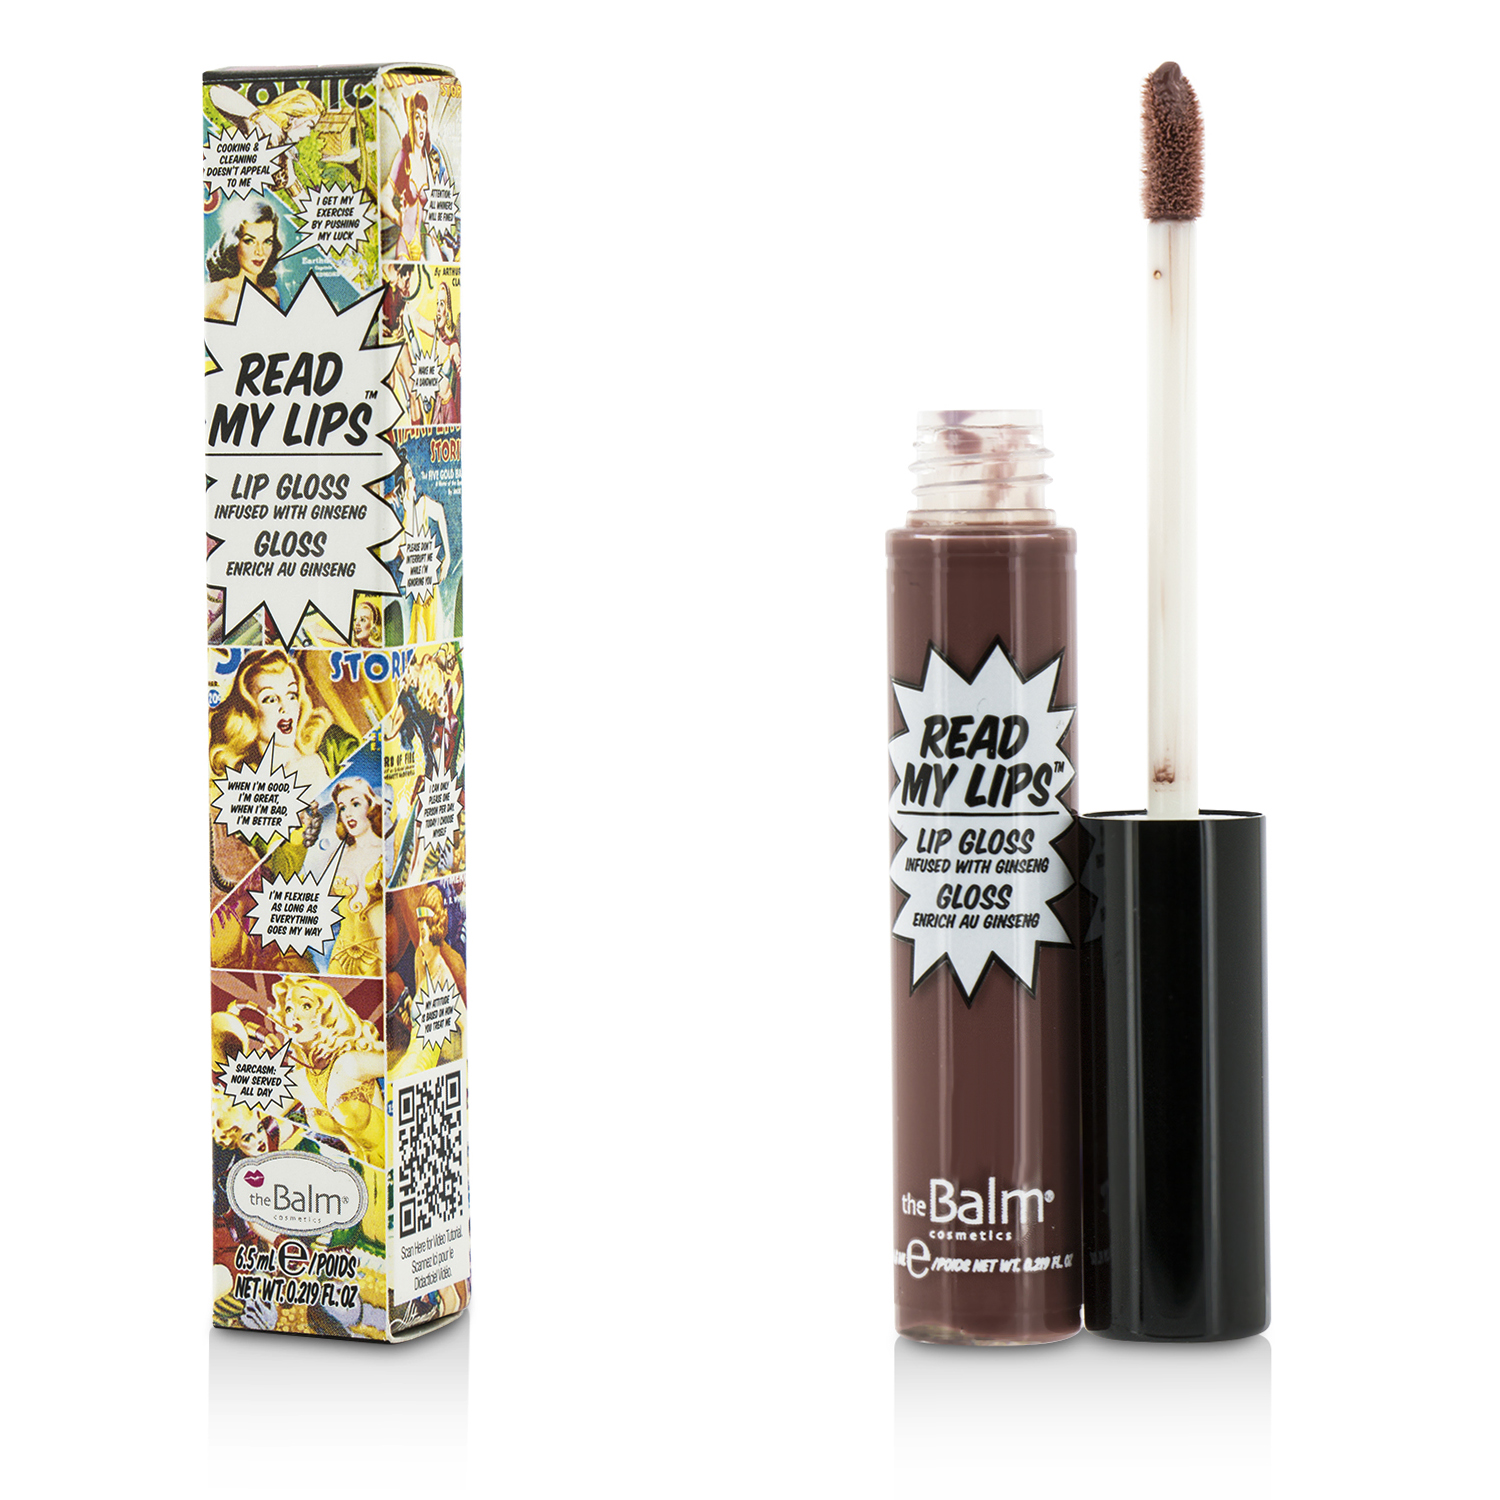 Read My Lips (Lip Gloss Infused With Ginseng) - #Grrr! TheBalm Image